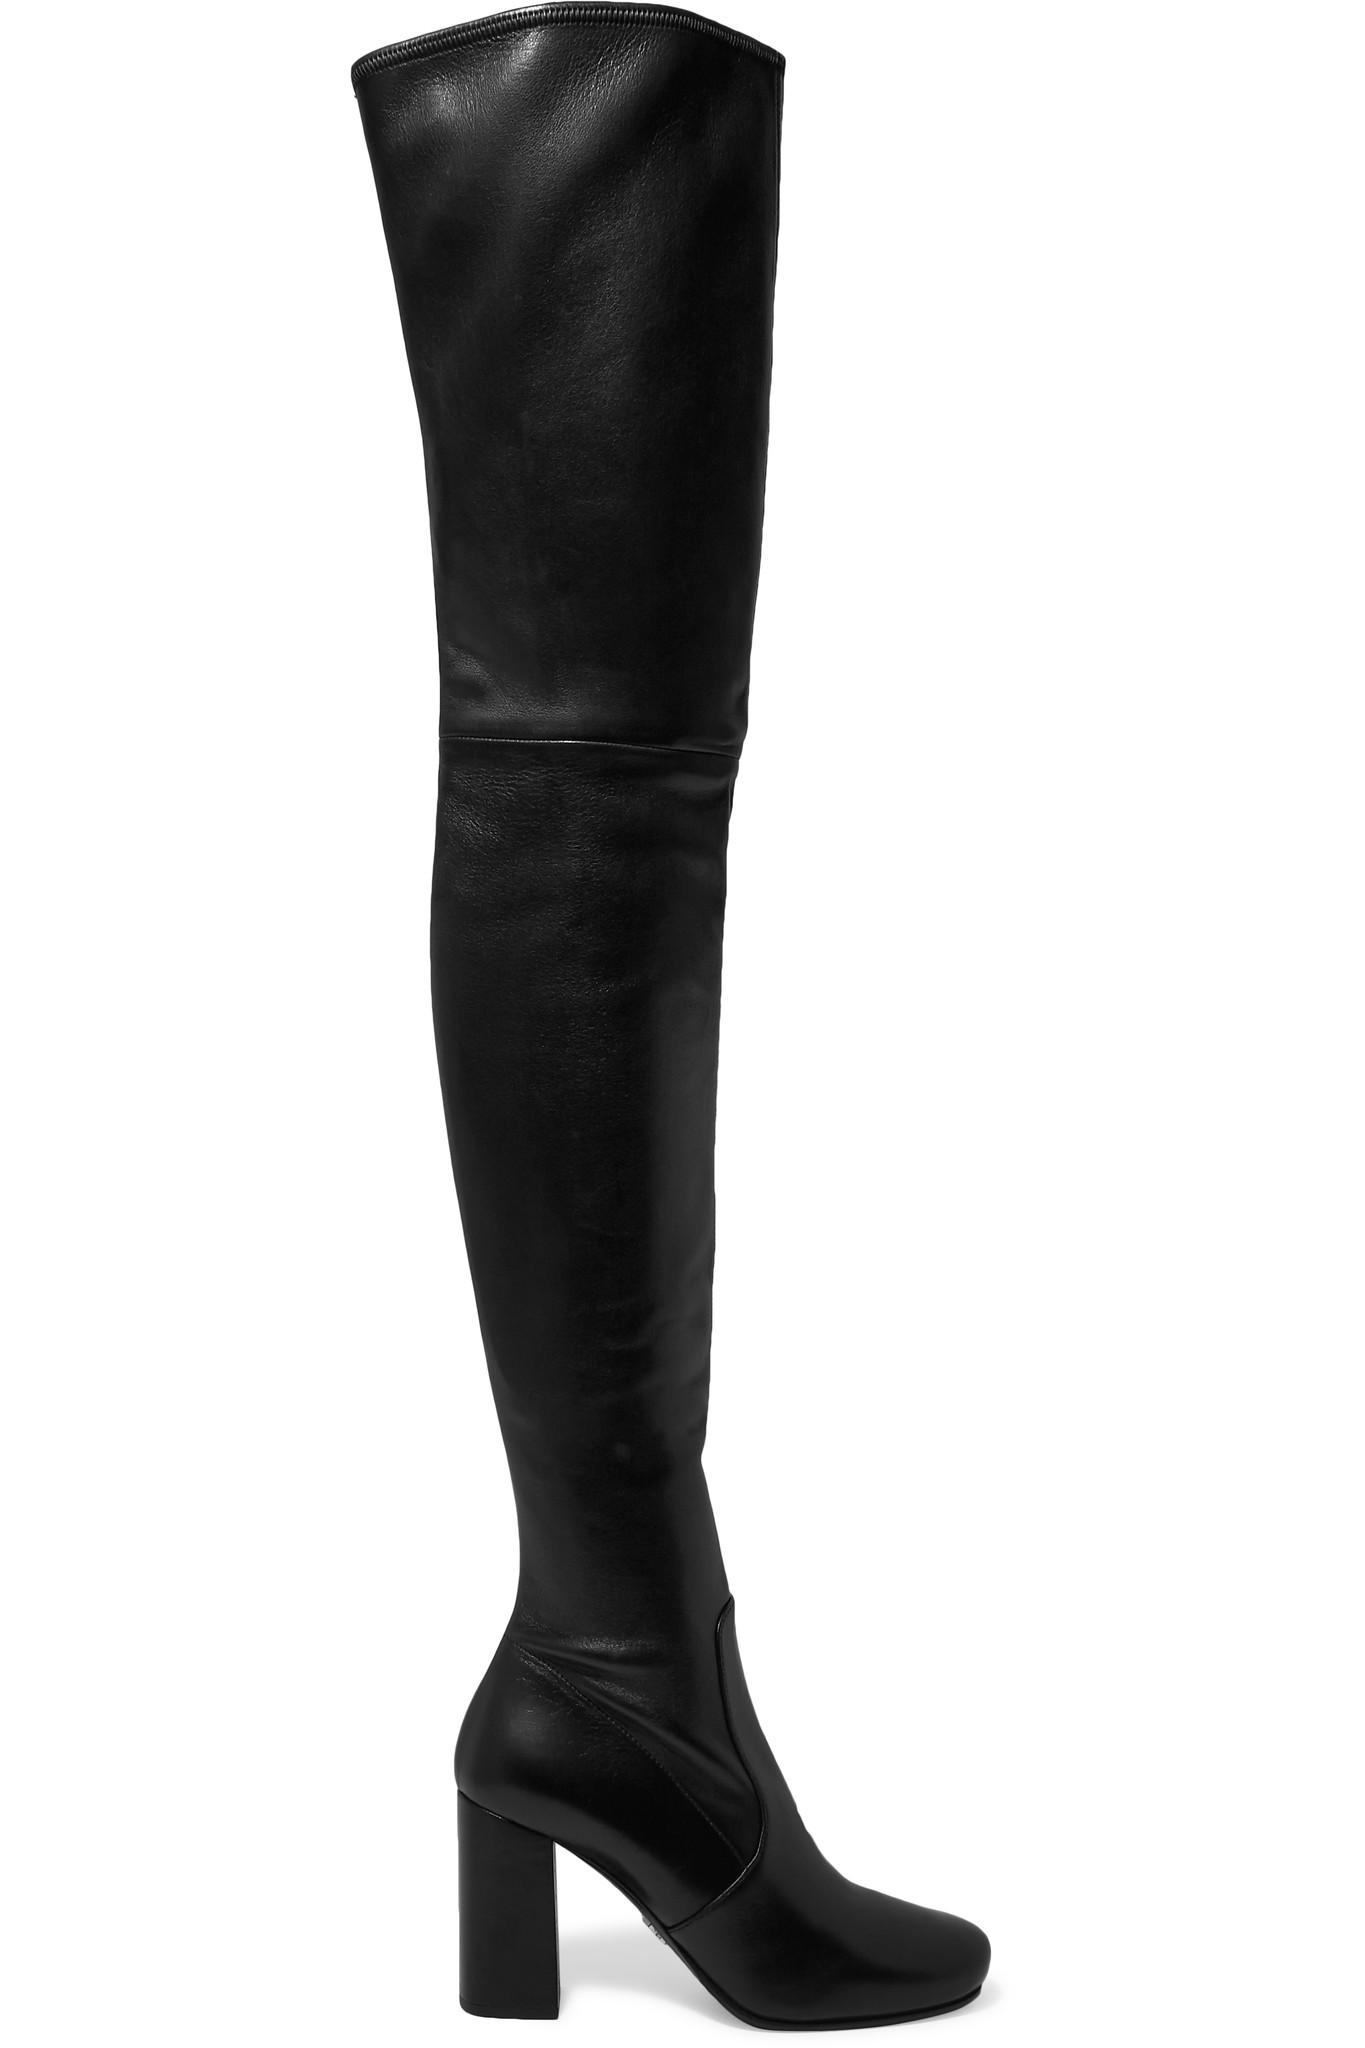 Prada Leather Over-the-knee Boots in Black | Lyst